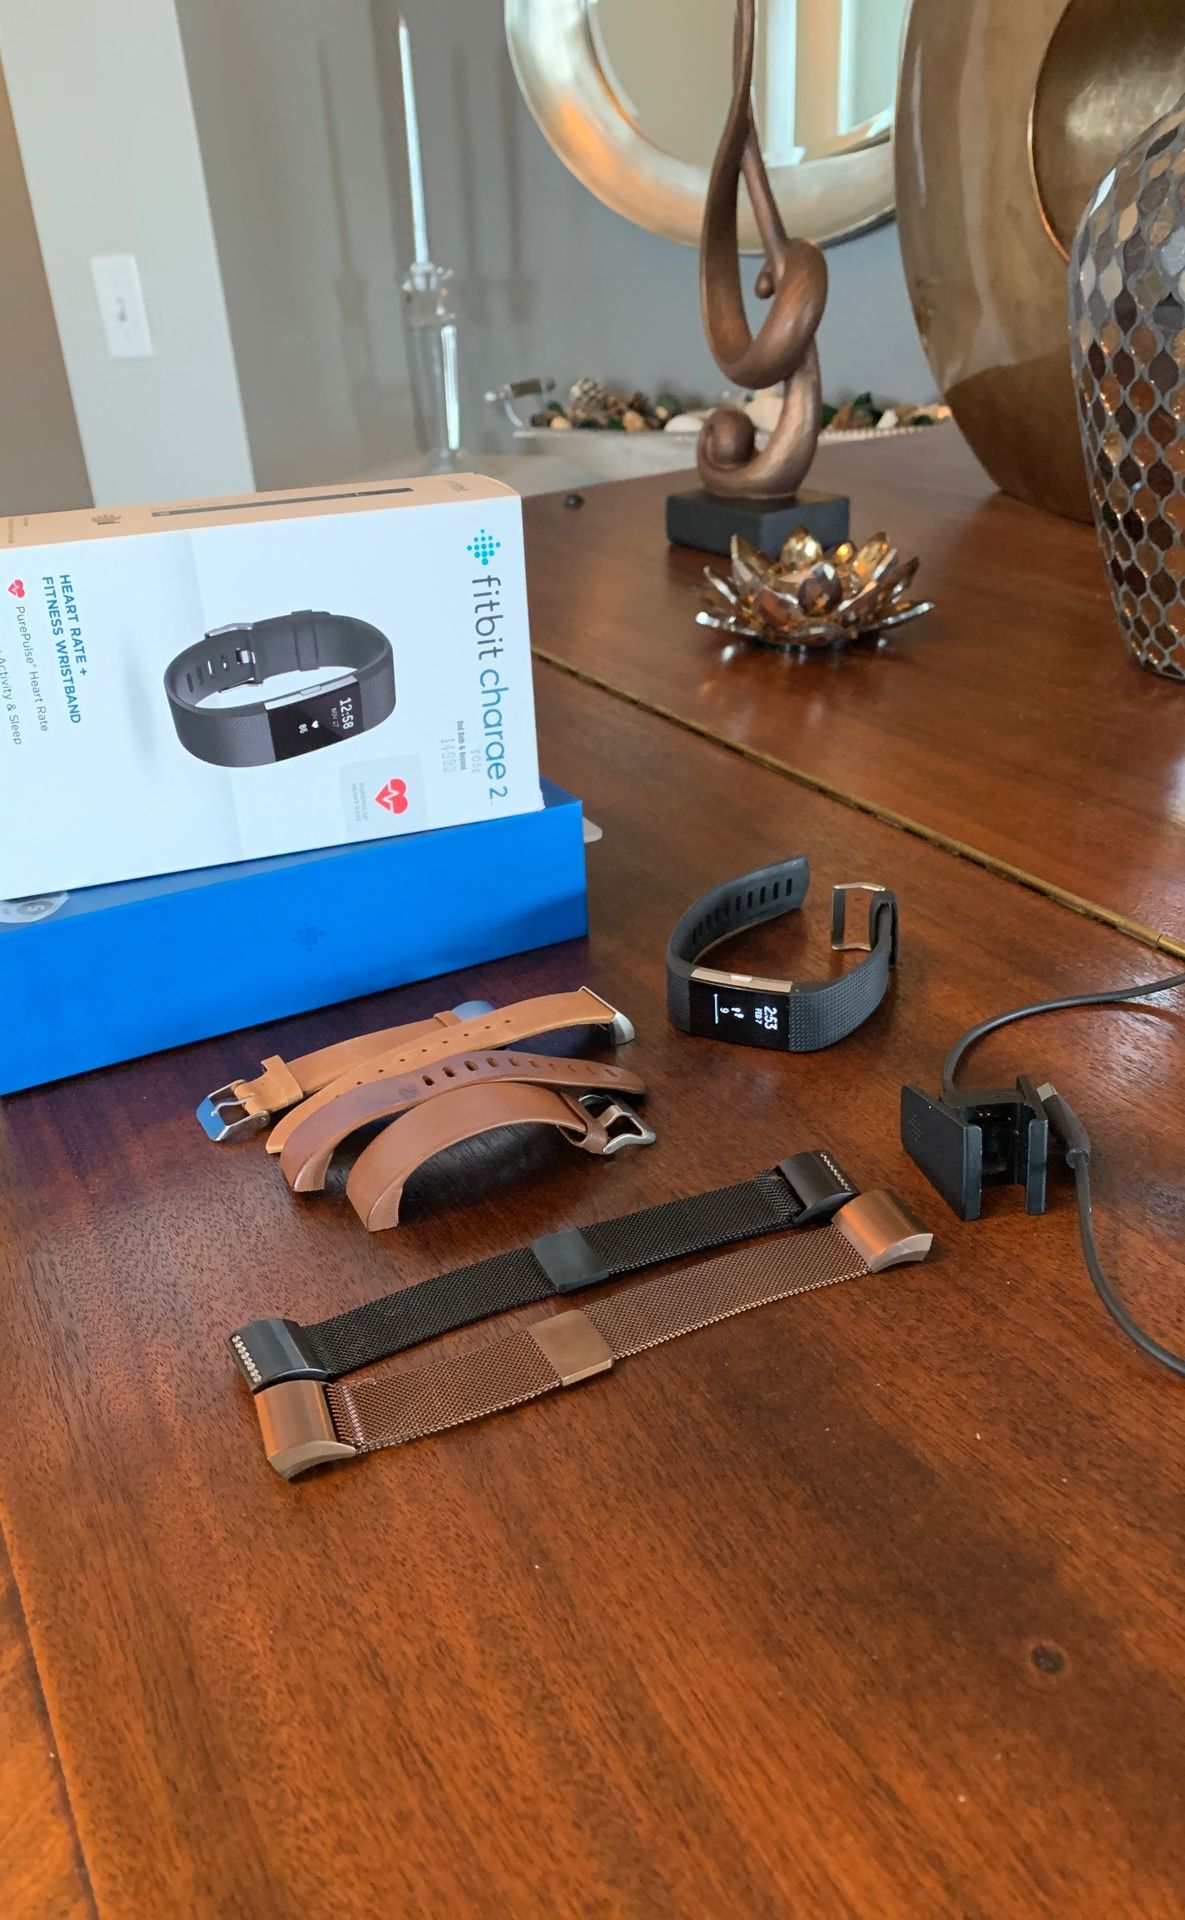 Fitbit Charge 2 with multiple bands